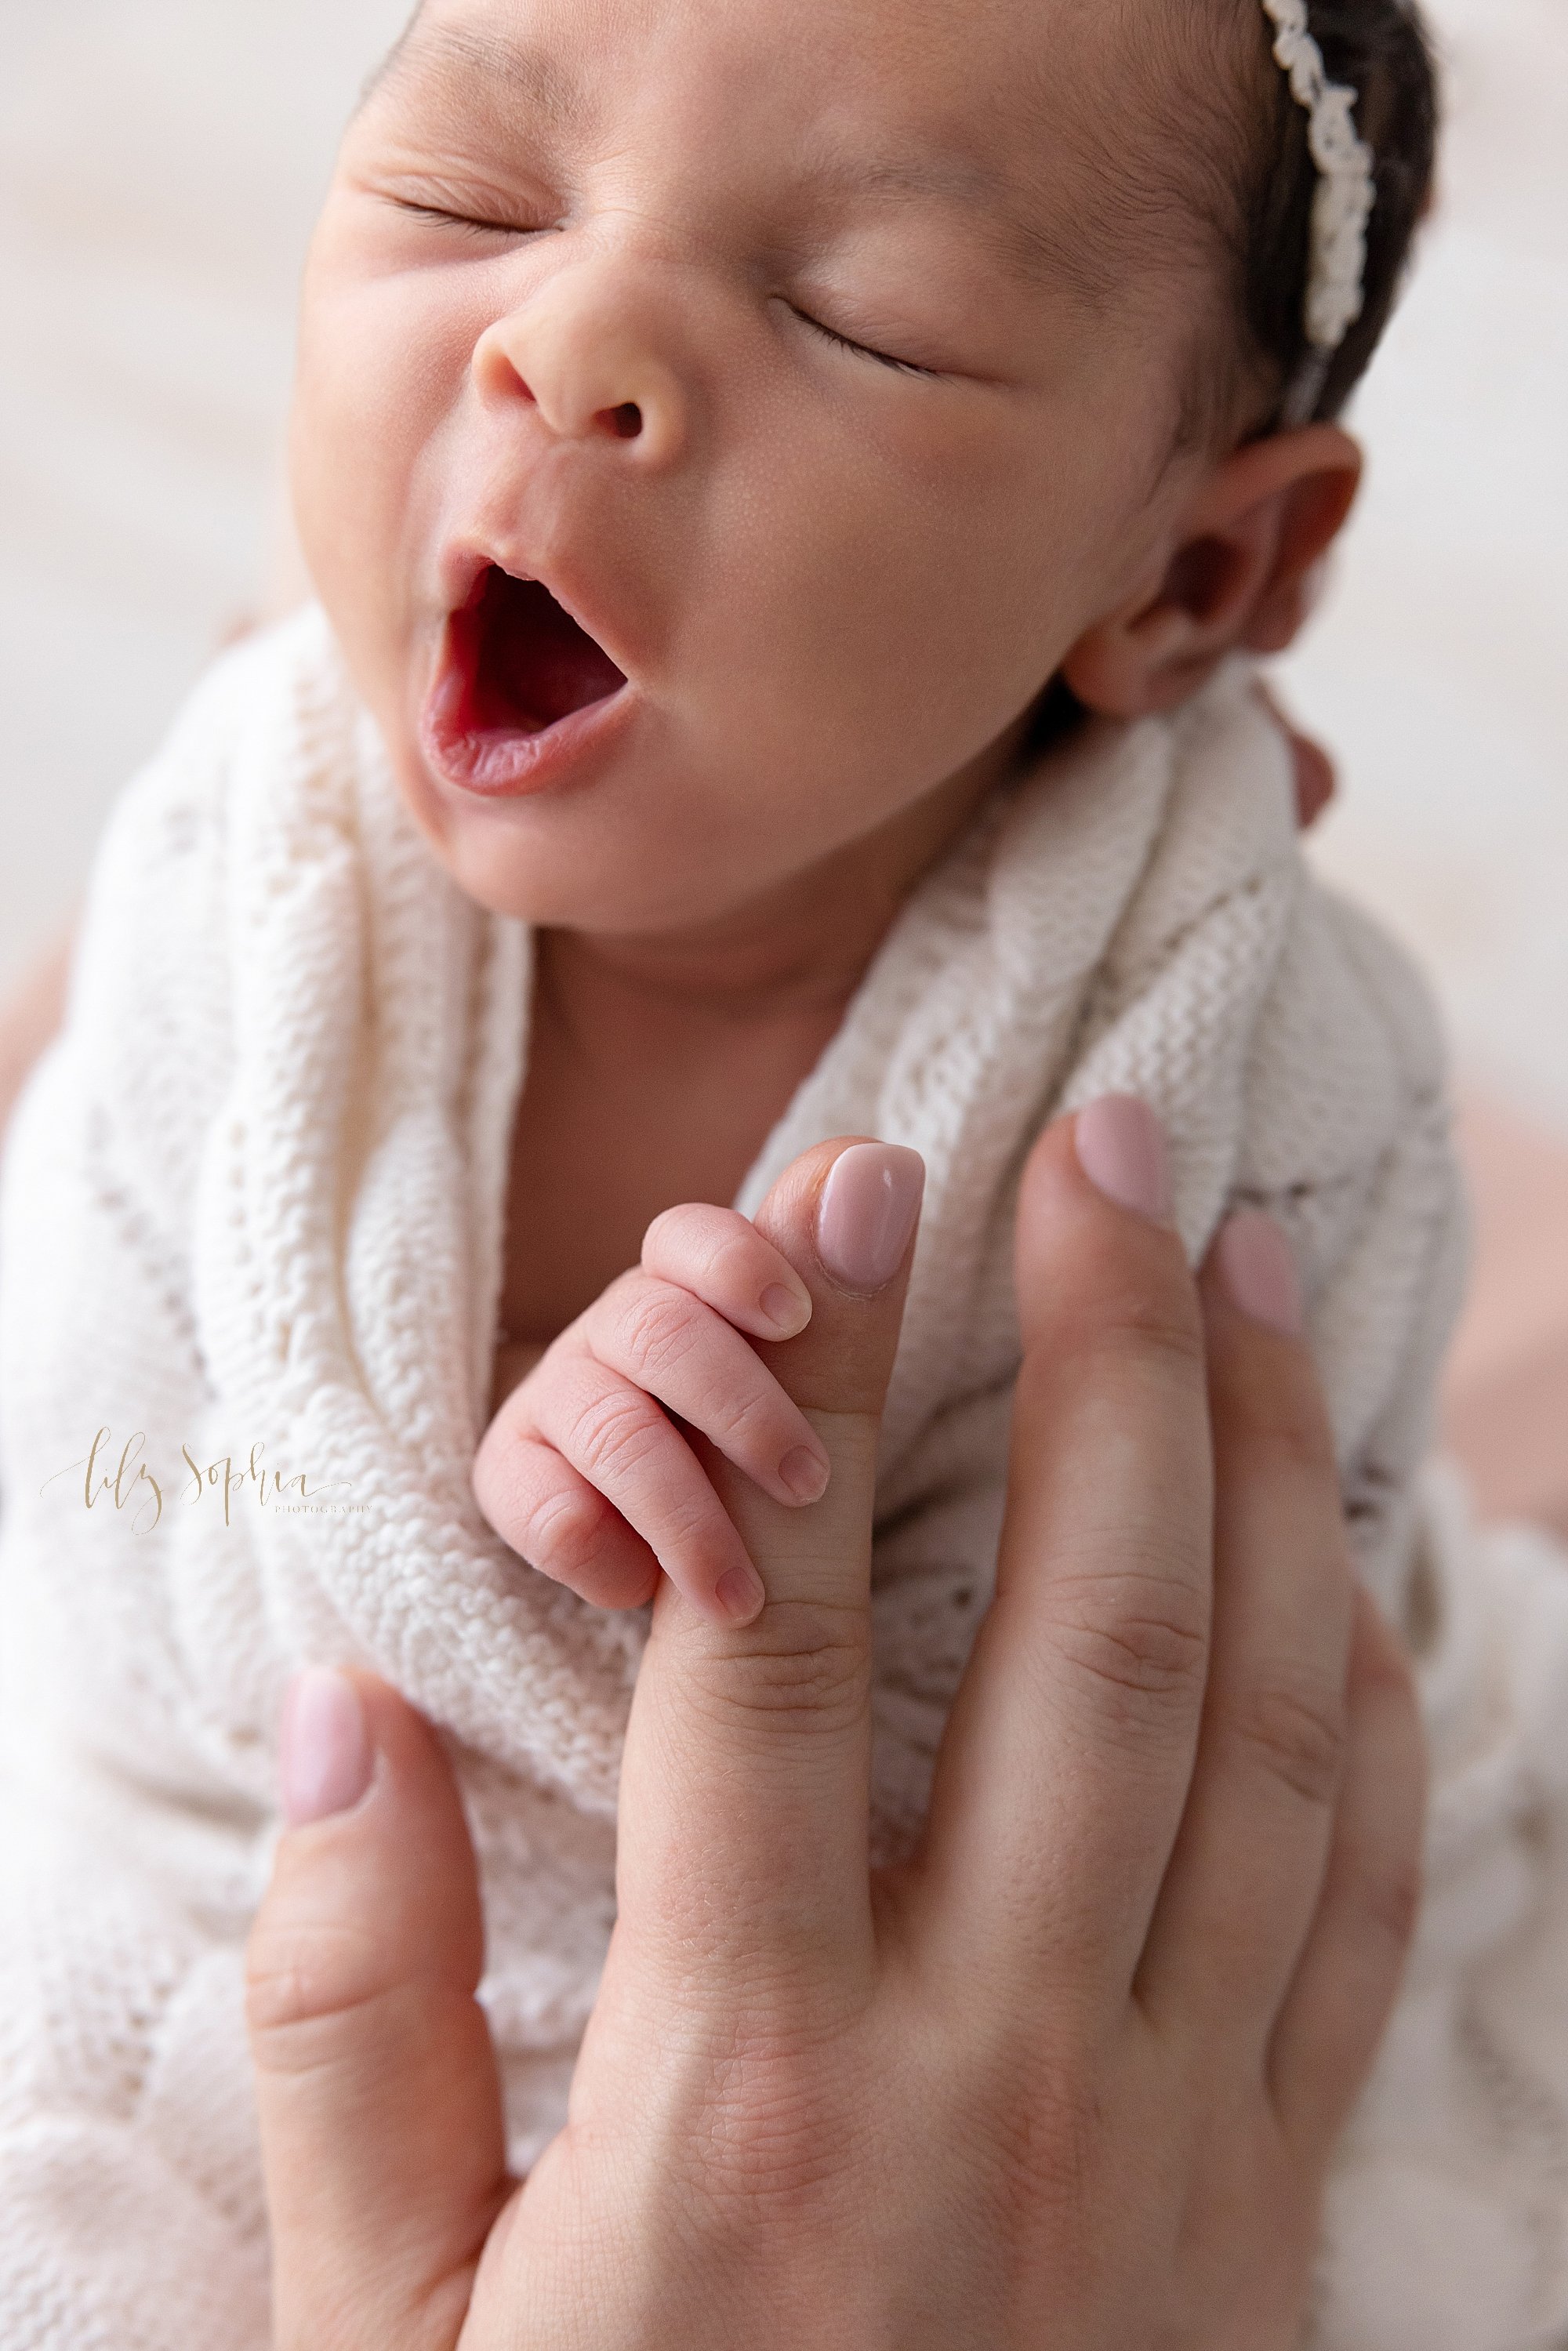  Close-up newborn portrait of a yawning newborn baby girl wearing a delicate headband in her black hair as she is wrapped in a soft white knitted blanket with her right hand peeking out to hold onto her mother’s index finger taken in a natural light 